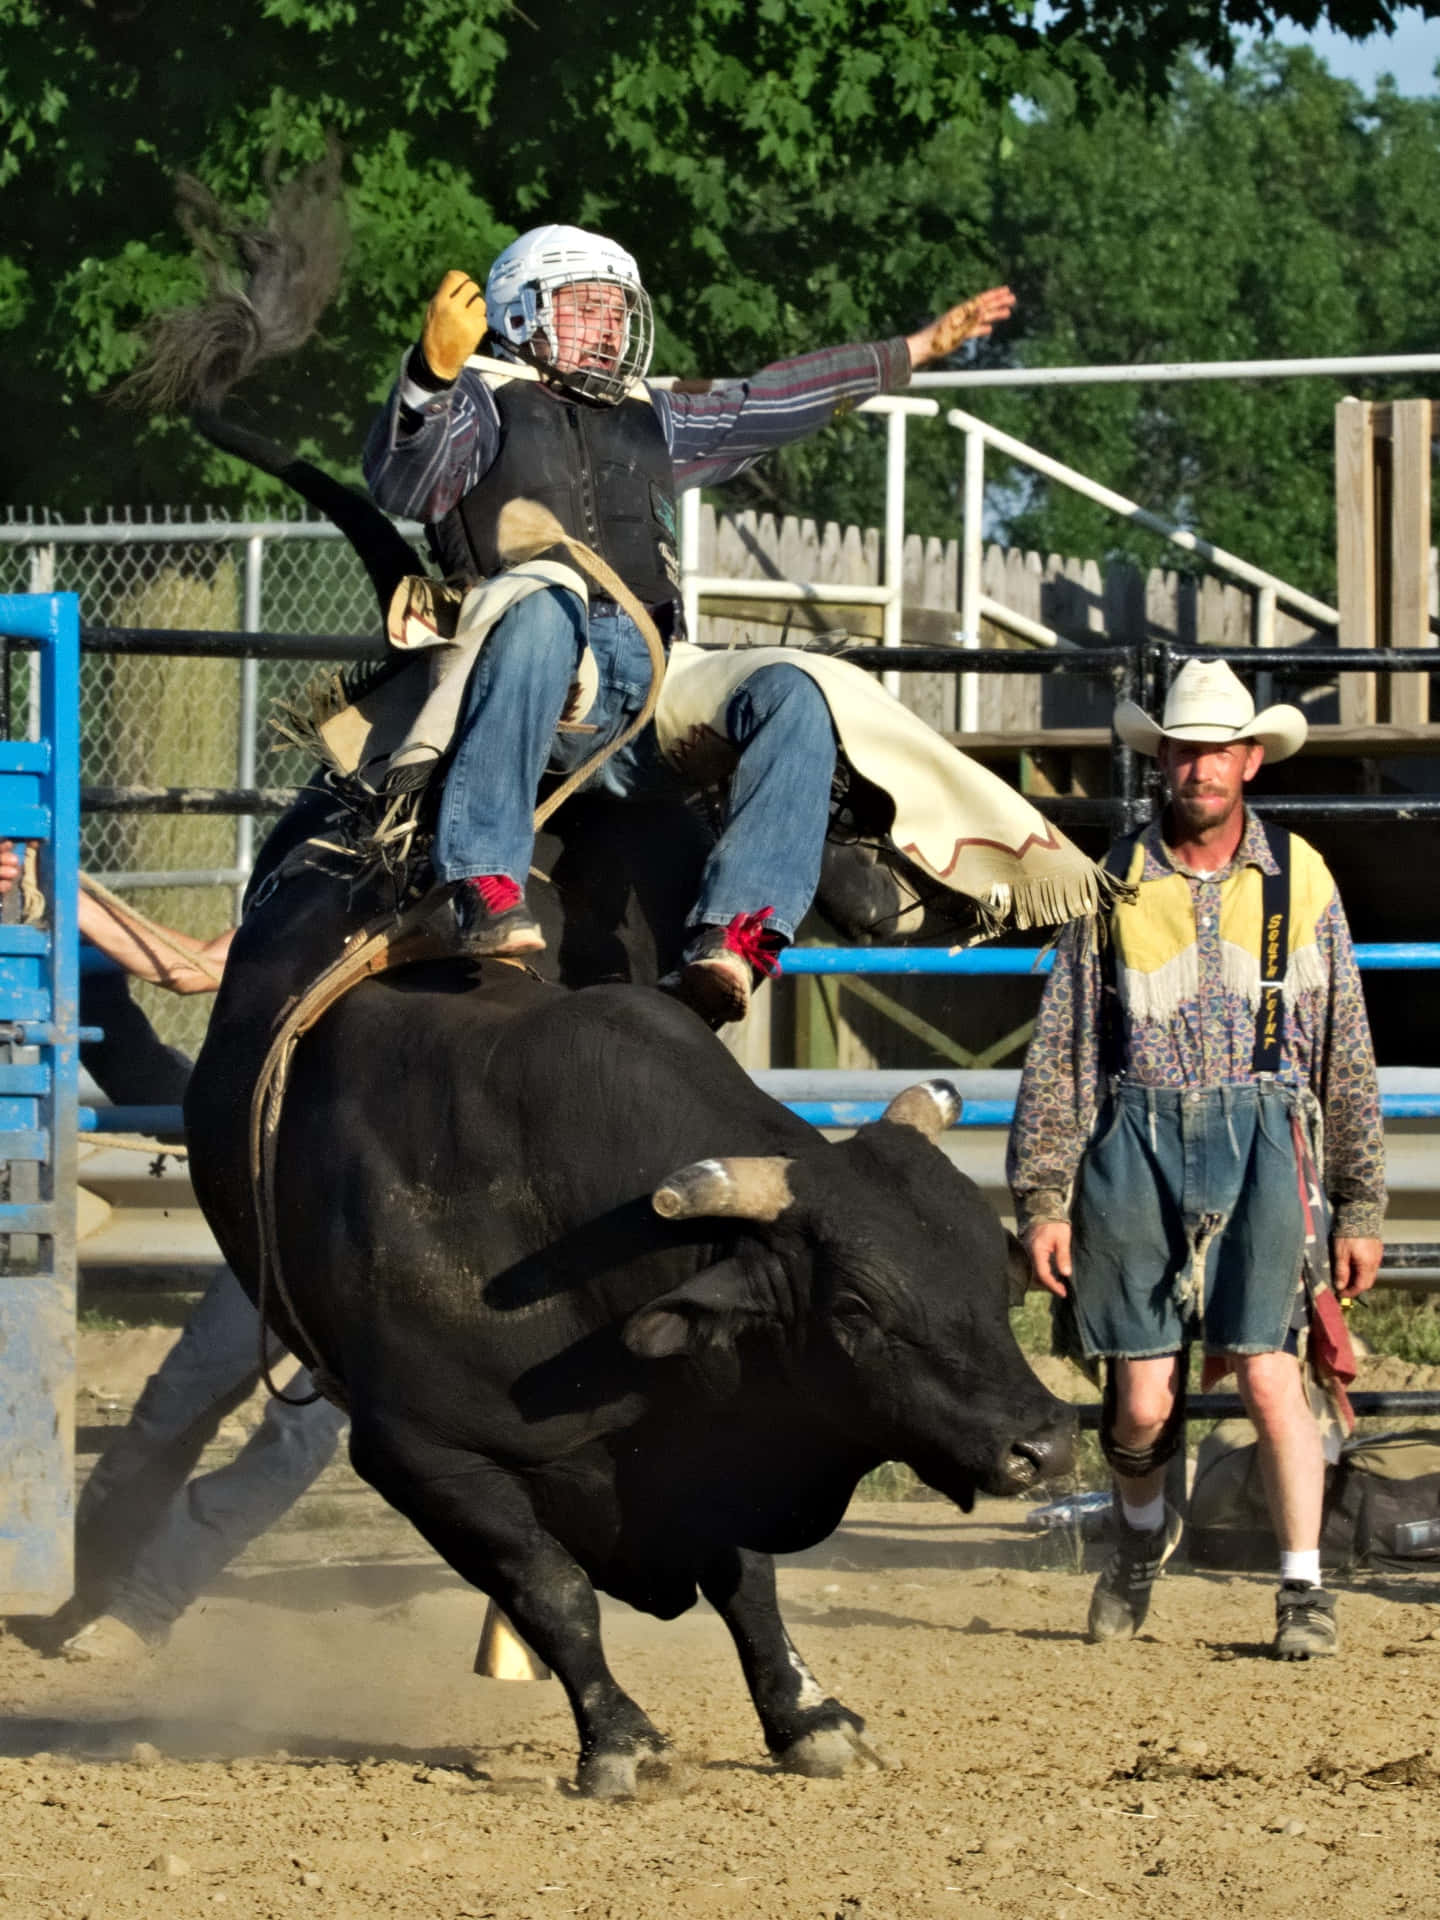 A Professional Bull Rider Showing Off His Skills